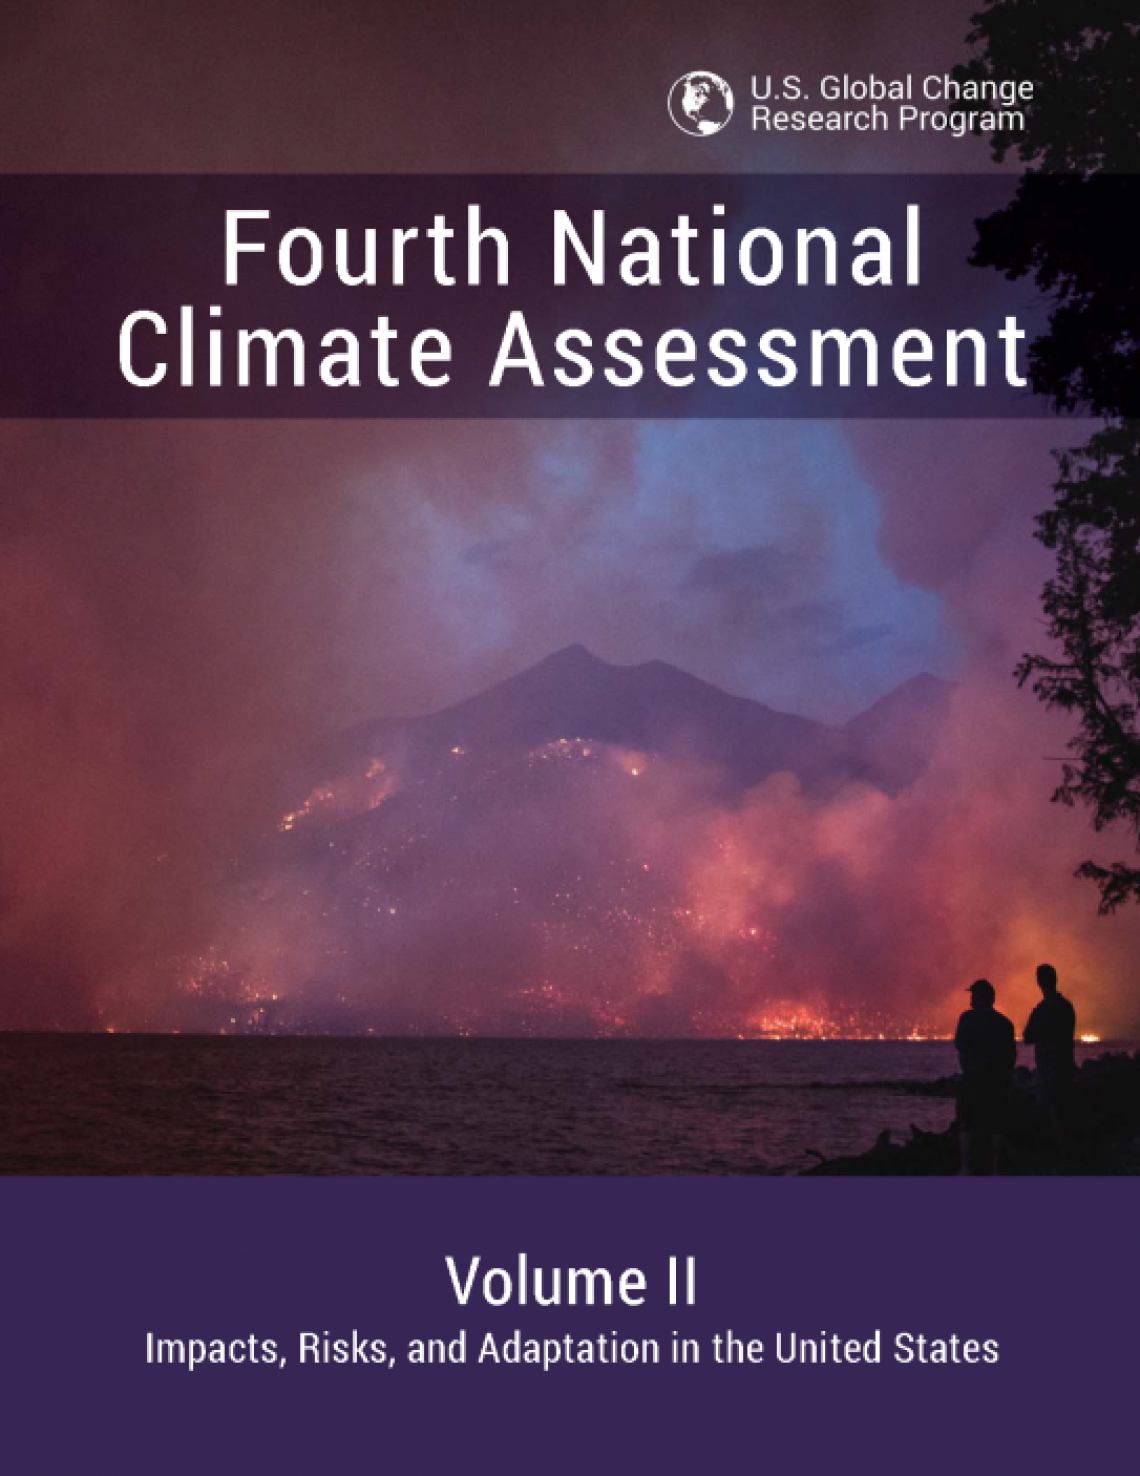 Cover image for the Fourth National Climate Assessment webinar: Volume II - Impacts, Risks, and Adaptation in the United States.